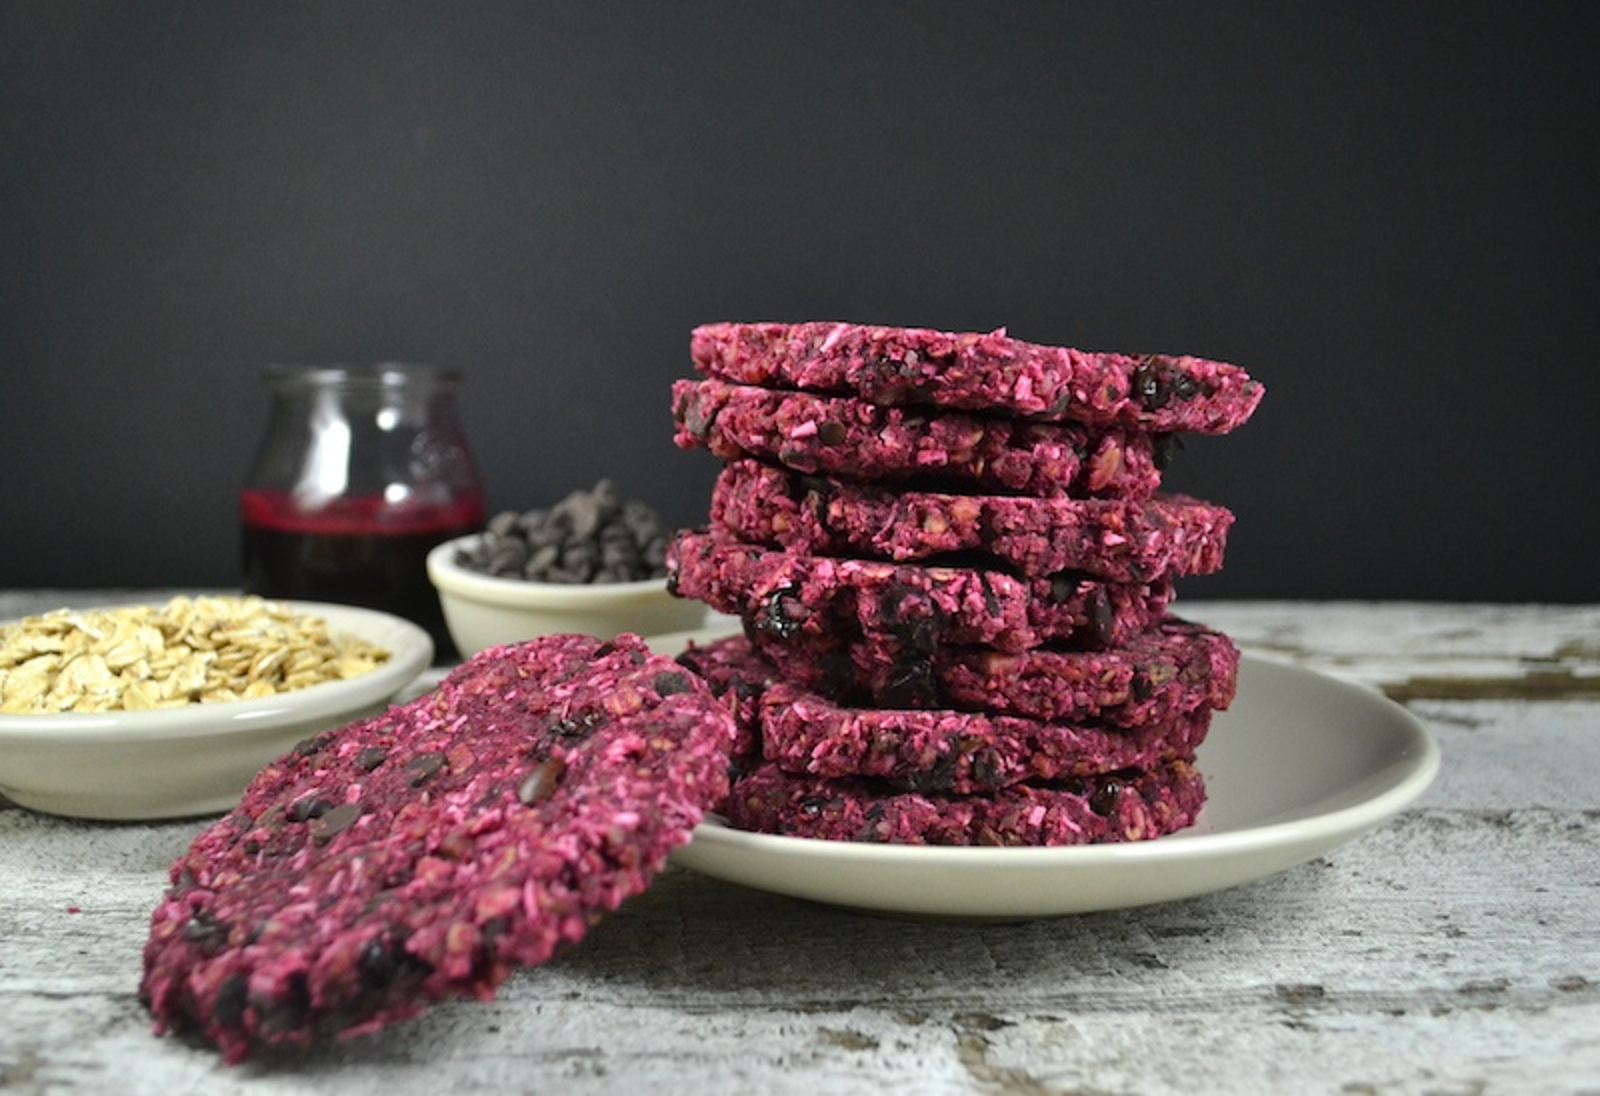 It's Homemade Cookies Day! Try These Yummy Vegan Cookies by Mayim Bialik and Other Superstar Bakers